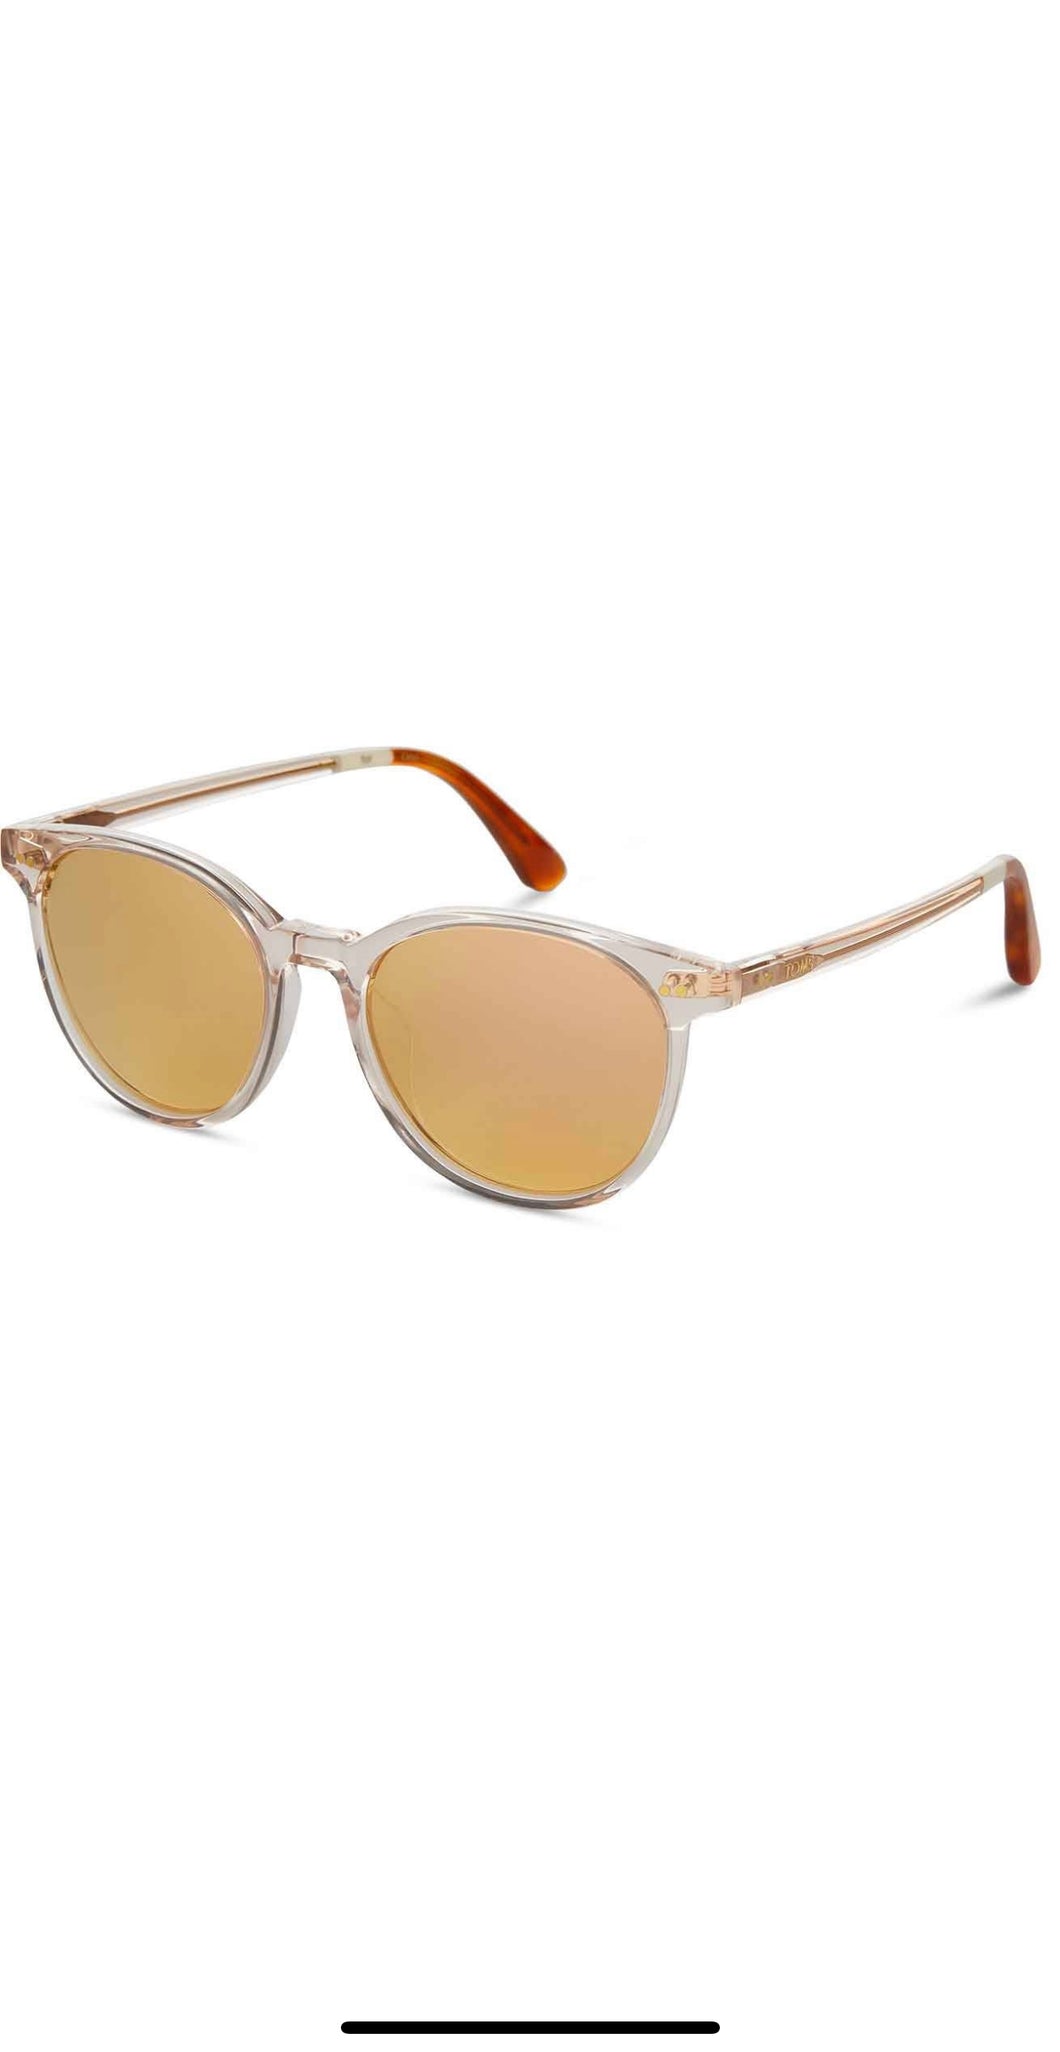 Toms: The Bellini Sunglasses Champ Crystal - 10011375